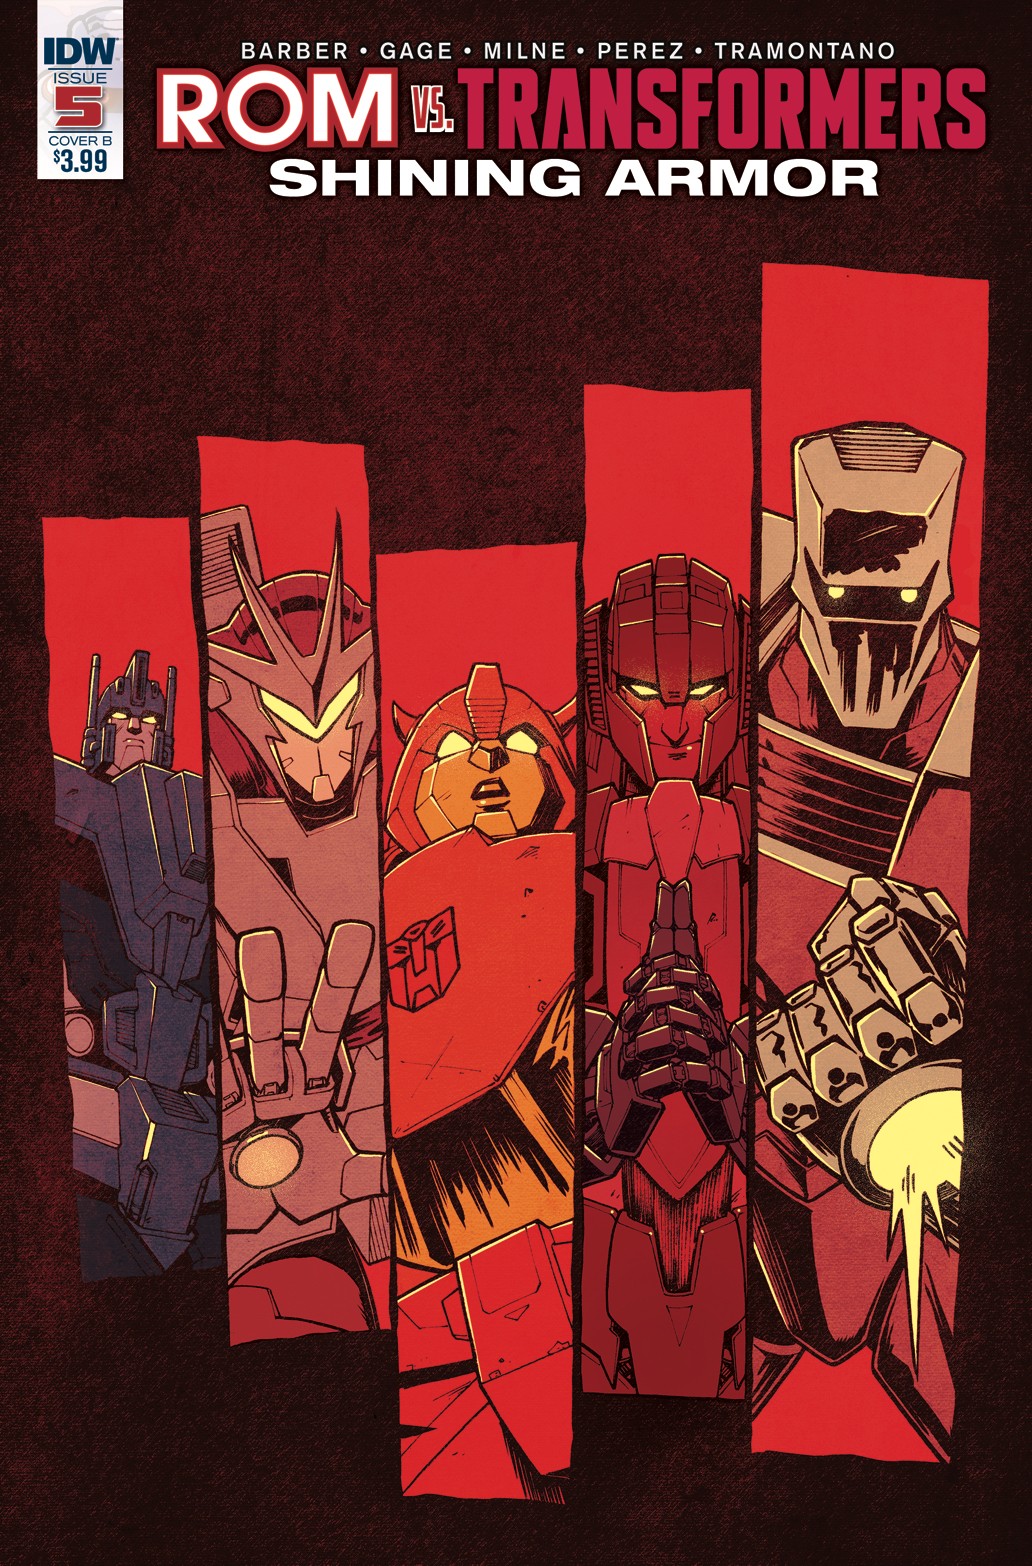 Transformers News: Variant Covers for IDW Rom Vs. Transformers: Shining Armor #5, by Roche/Burcham & Messina